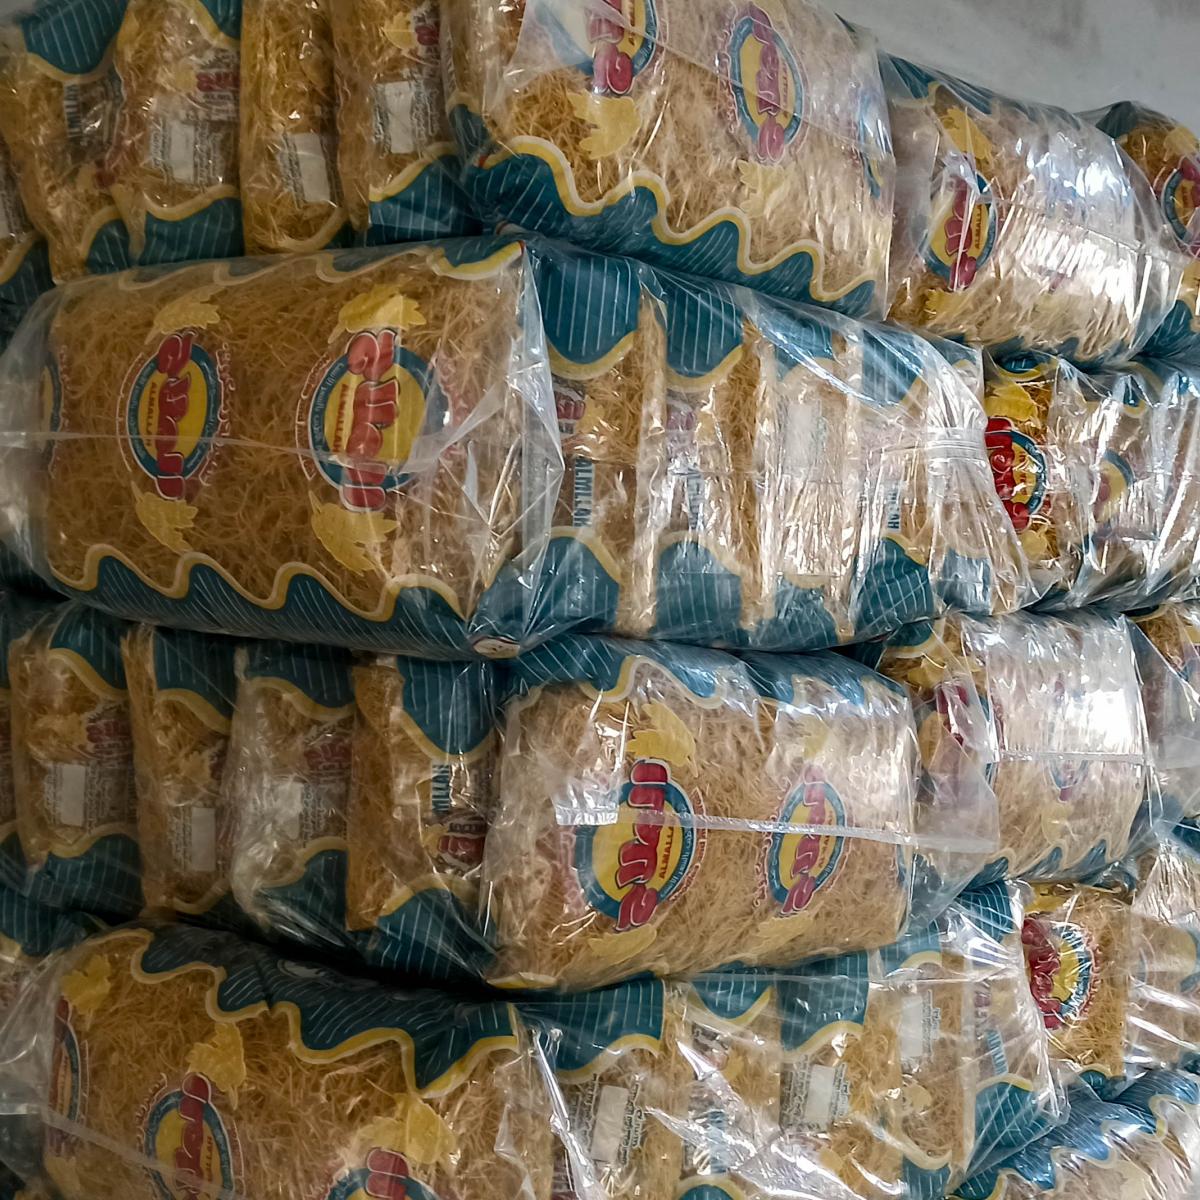 USAID’s recommendations to improve quality control and diversify product offerings, such as package sizes, were key to Ayman’s vermicelli production. 